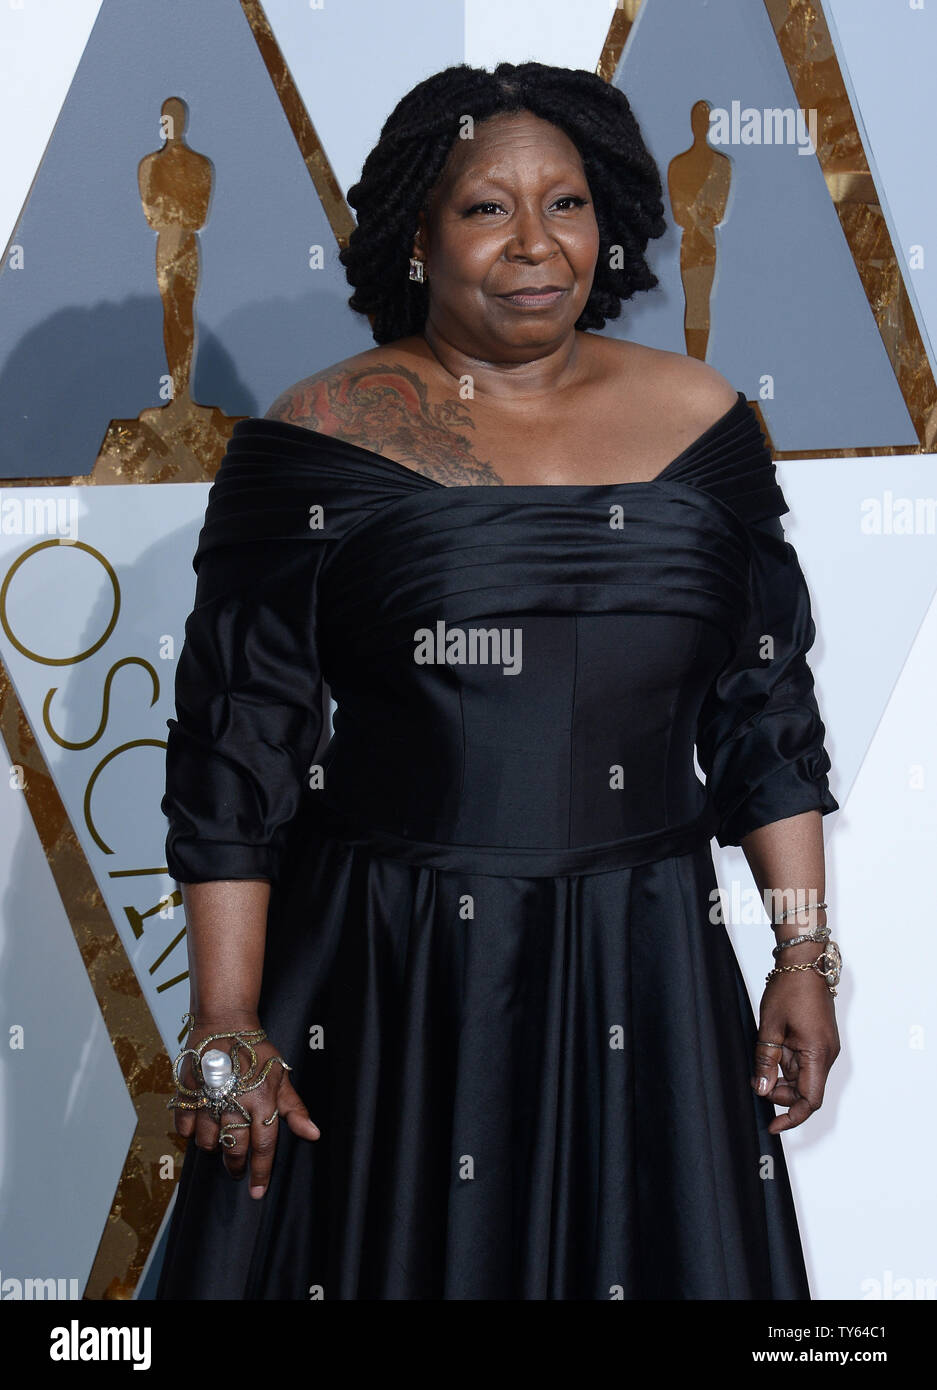 Actress Whoopi Goldberg arrives on the red carpet for the 88th Academy Awards, at the Hollywood and Highland Center in the Hollywood section of Los Angeles on February 28, 2016.    Photo by Jim Ruymen/UPI Stock Photo